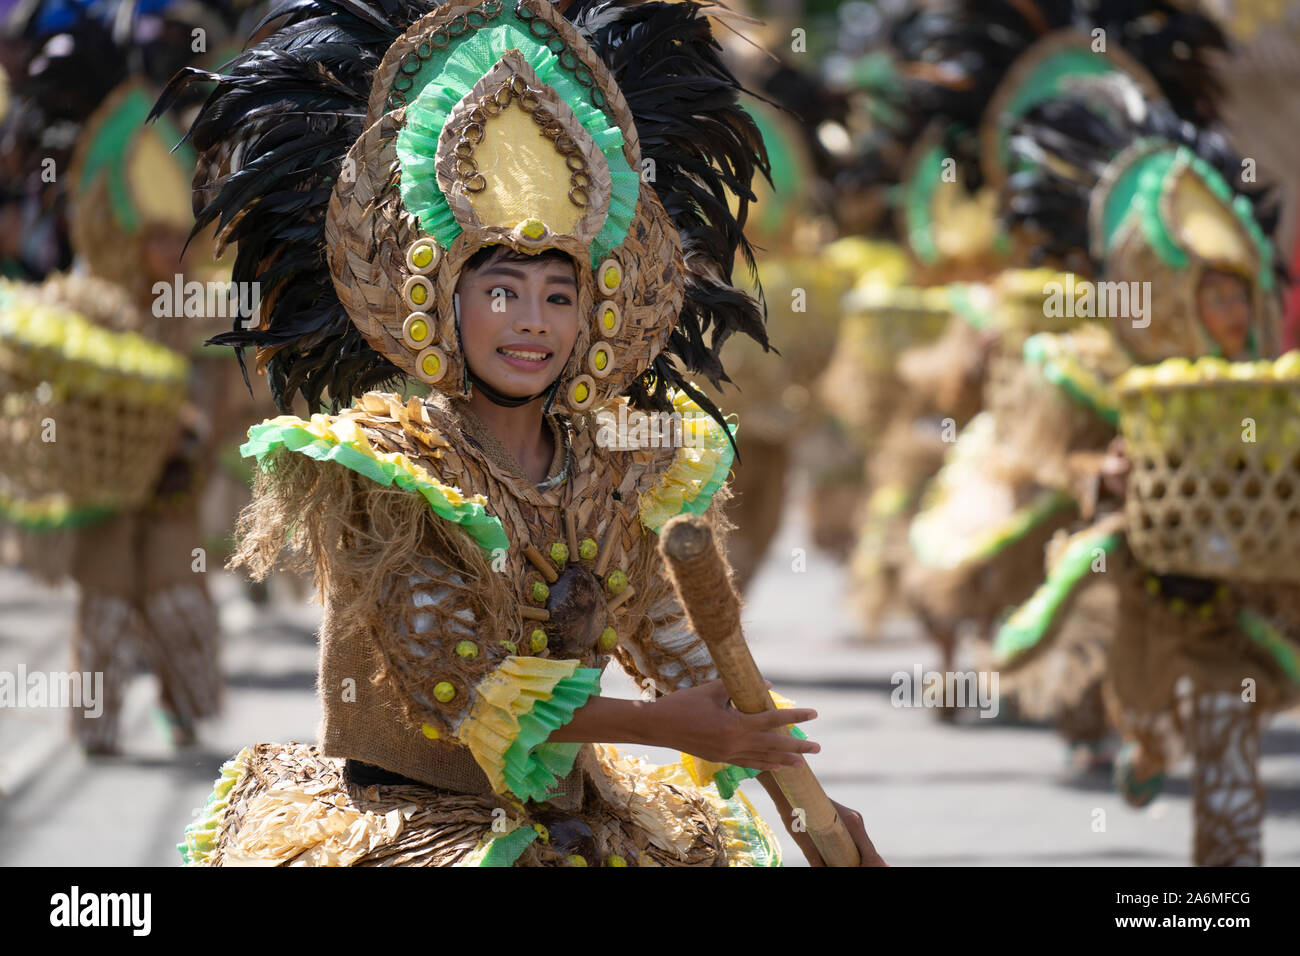 Camiguin Island,Mindanao,Philippines 27th October 2019.School children perform in a spectacular street dancing parade as part of the 40th Lanzones fes Stock Photo